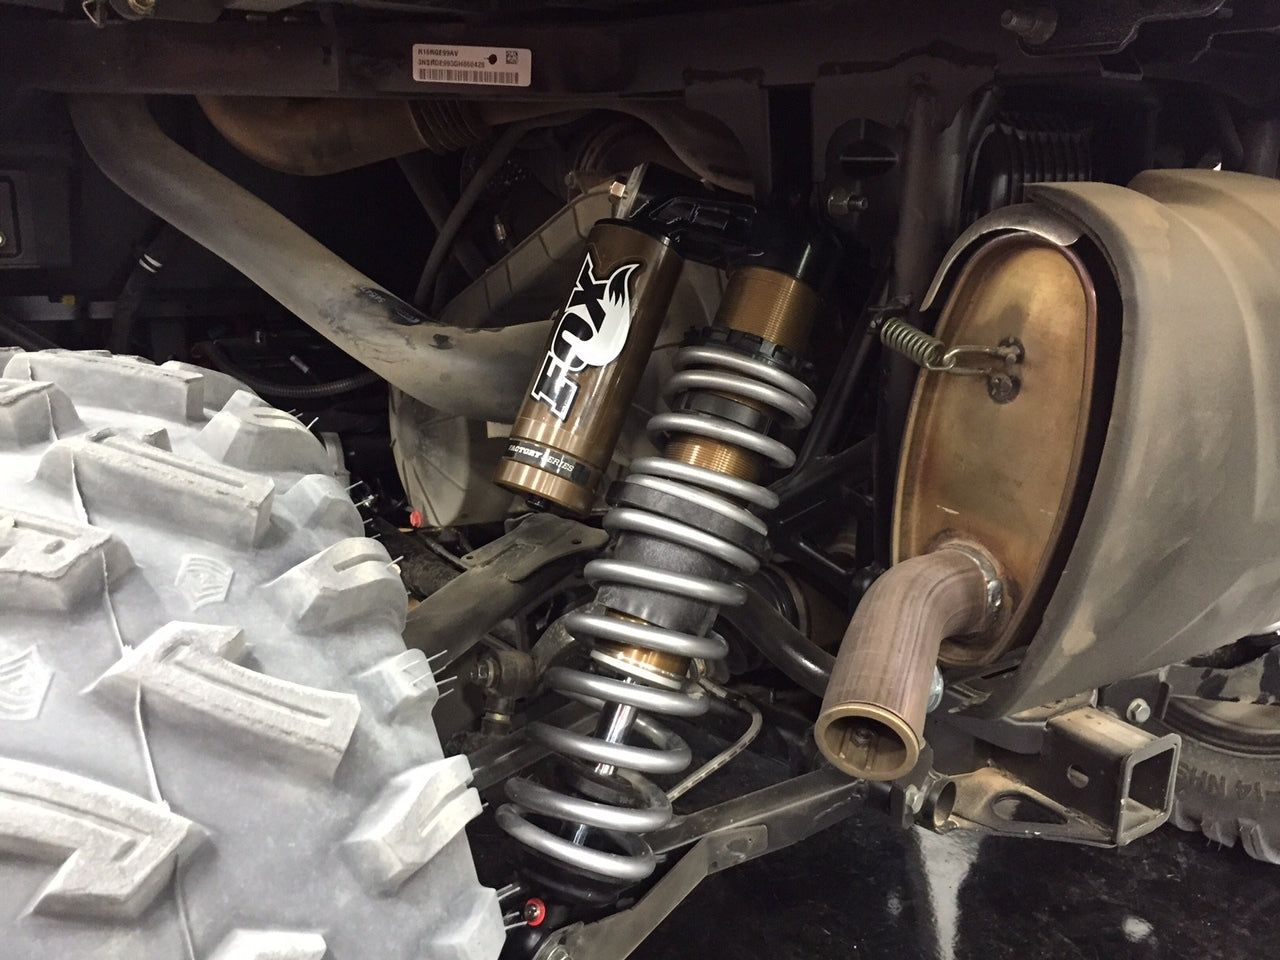 Rear shock installed with dual rate springs